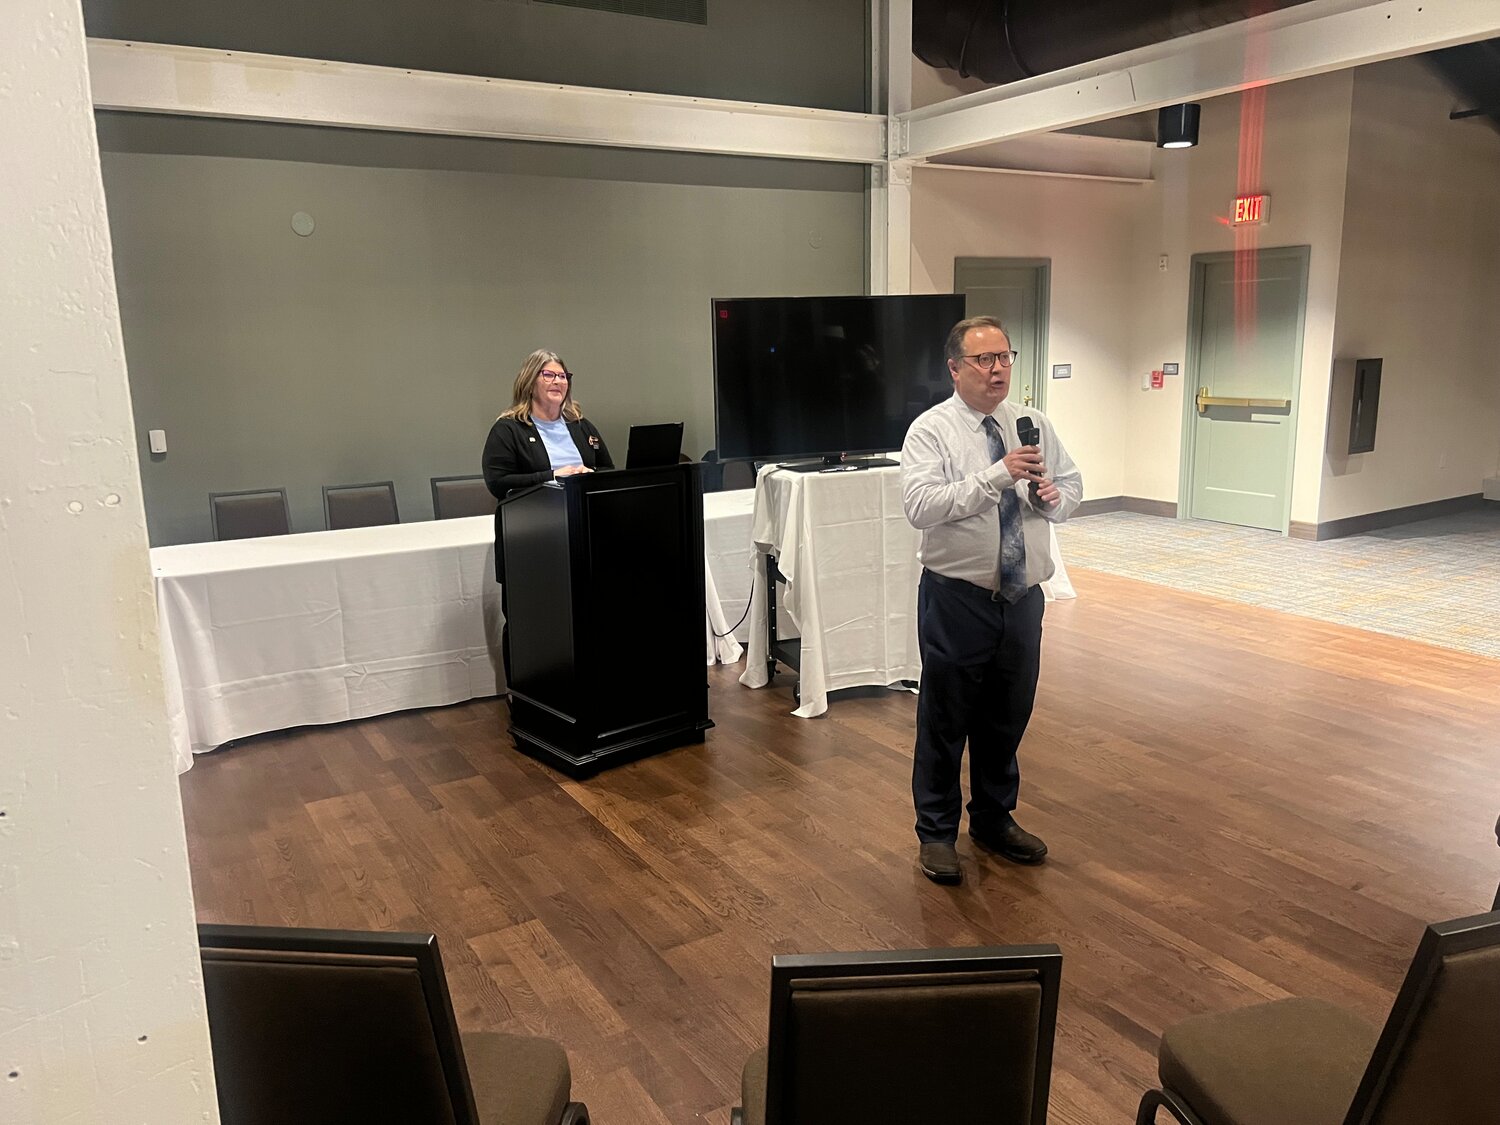 Community Development Director John Hinzman and Mayor Mary Fasbender spoke at the onset of a ceremony celebrating completion of The Confluence on the riverfront in downtown Hastings Thursday night.